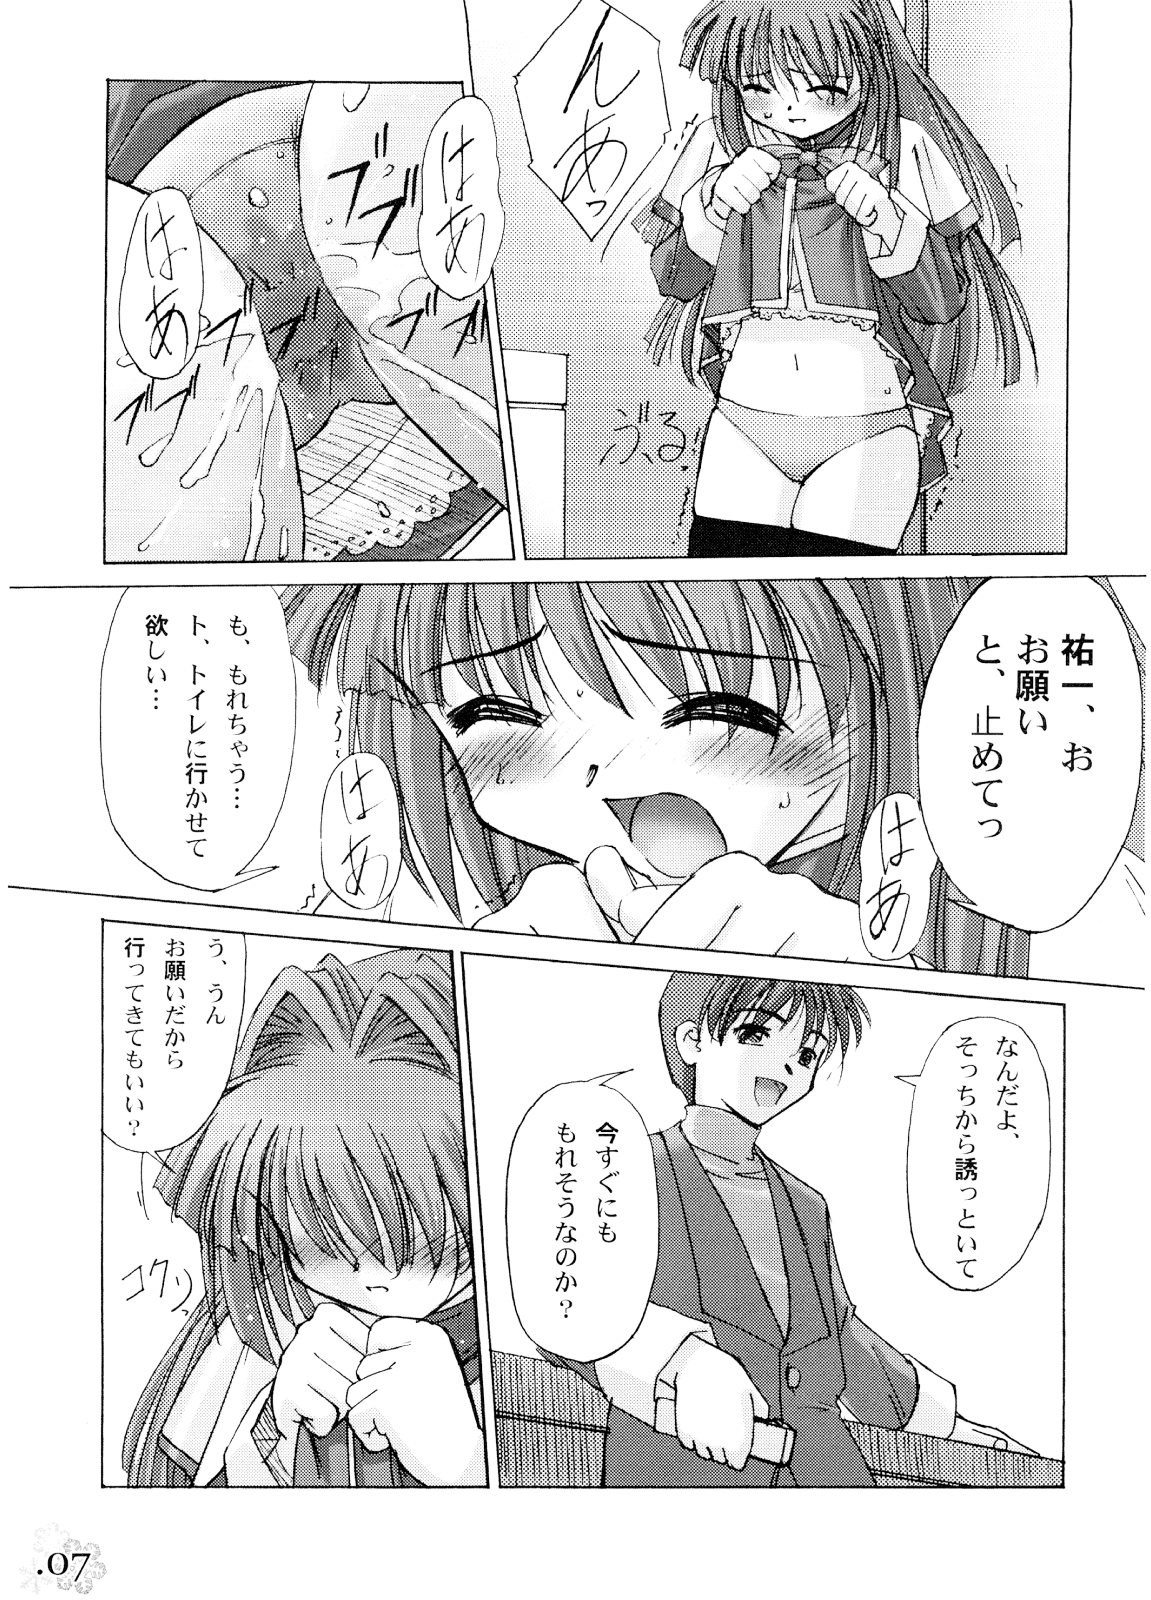 (C62) [G-Power! (SASAYUKi、Gody)] You are the only VERSION:KANON Part2 (カノン)